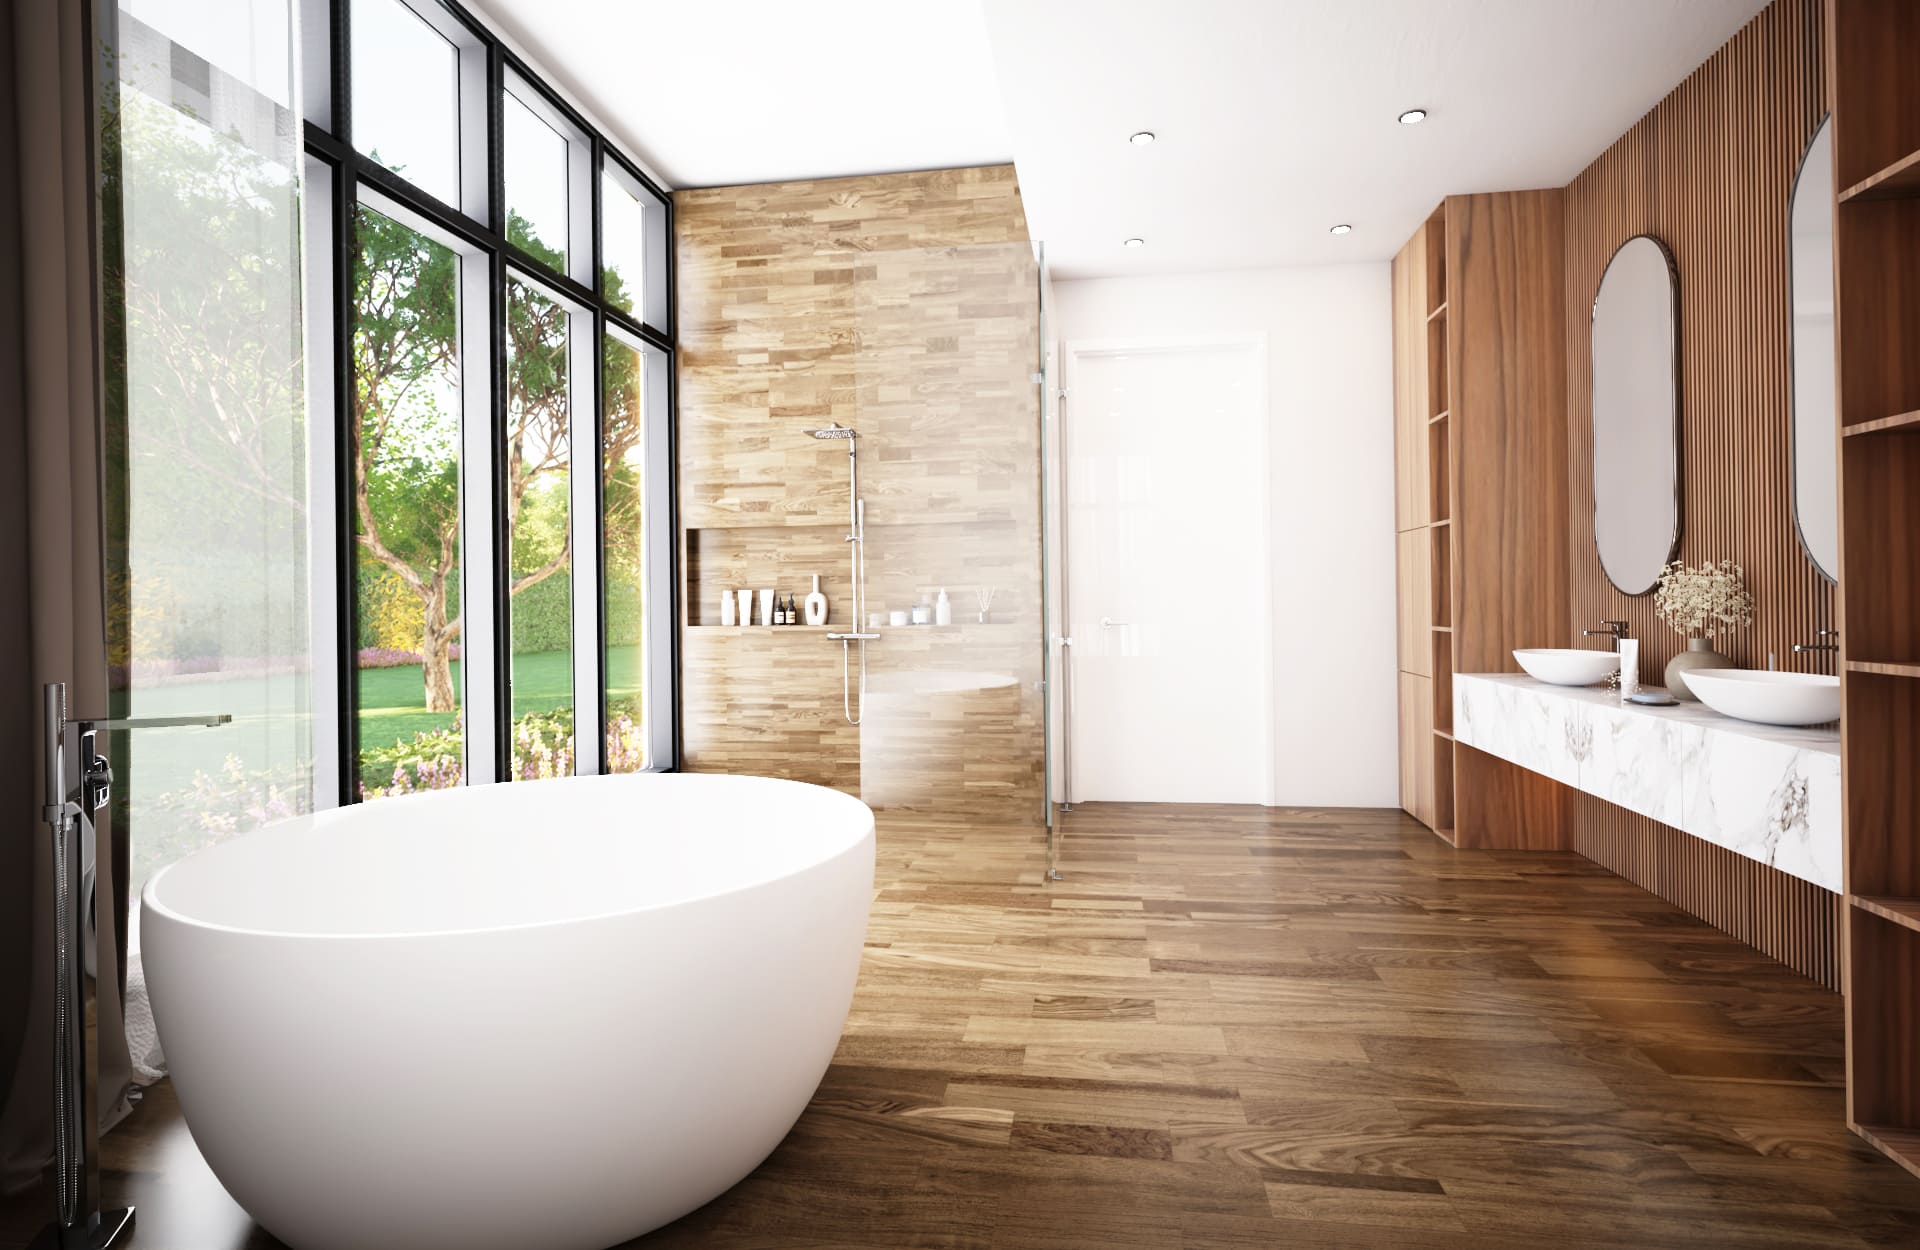 rounded bath with beautiful view